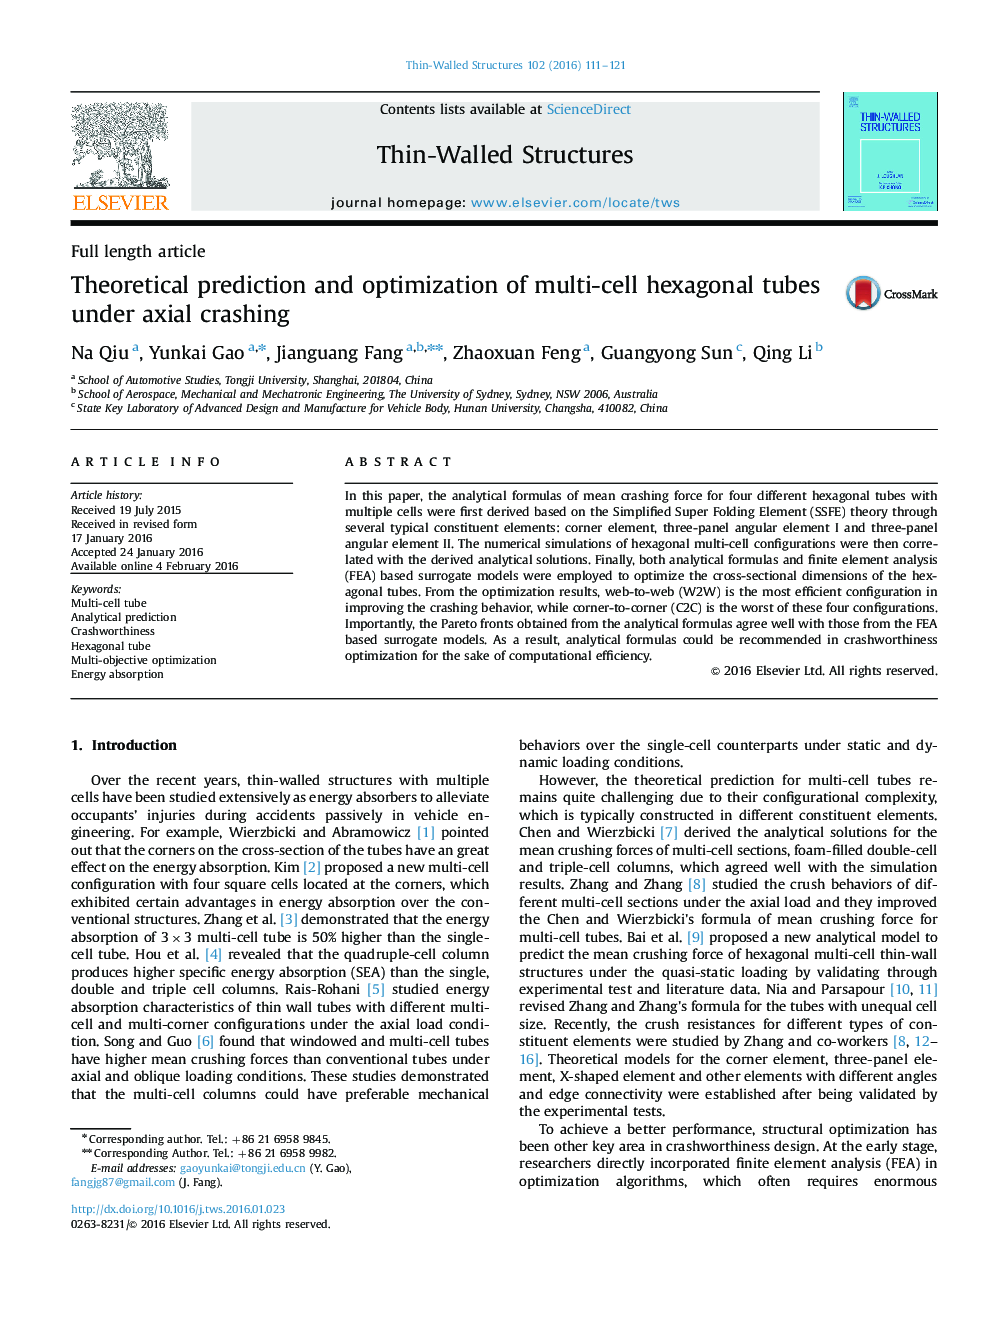 Theoretical prediction and optimization of multi-cell hexagonal tubes under axial crashing